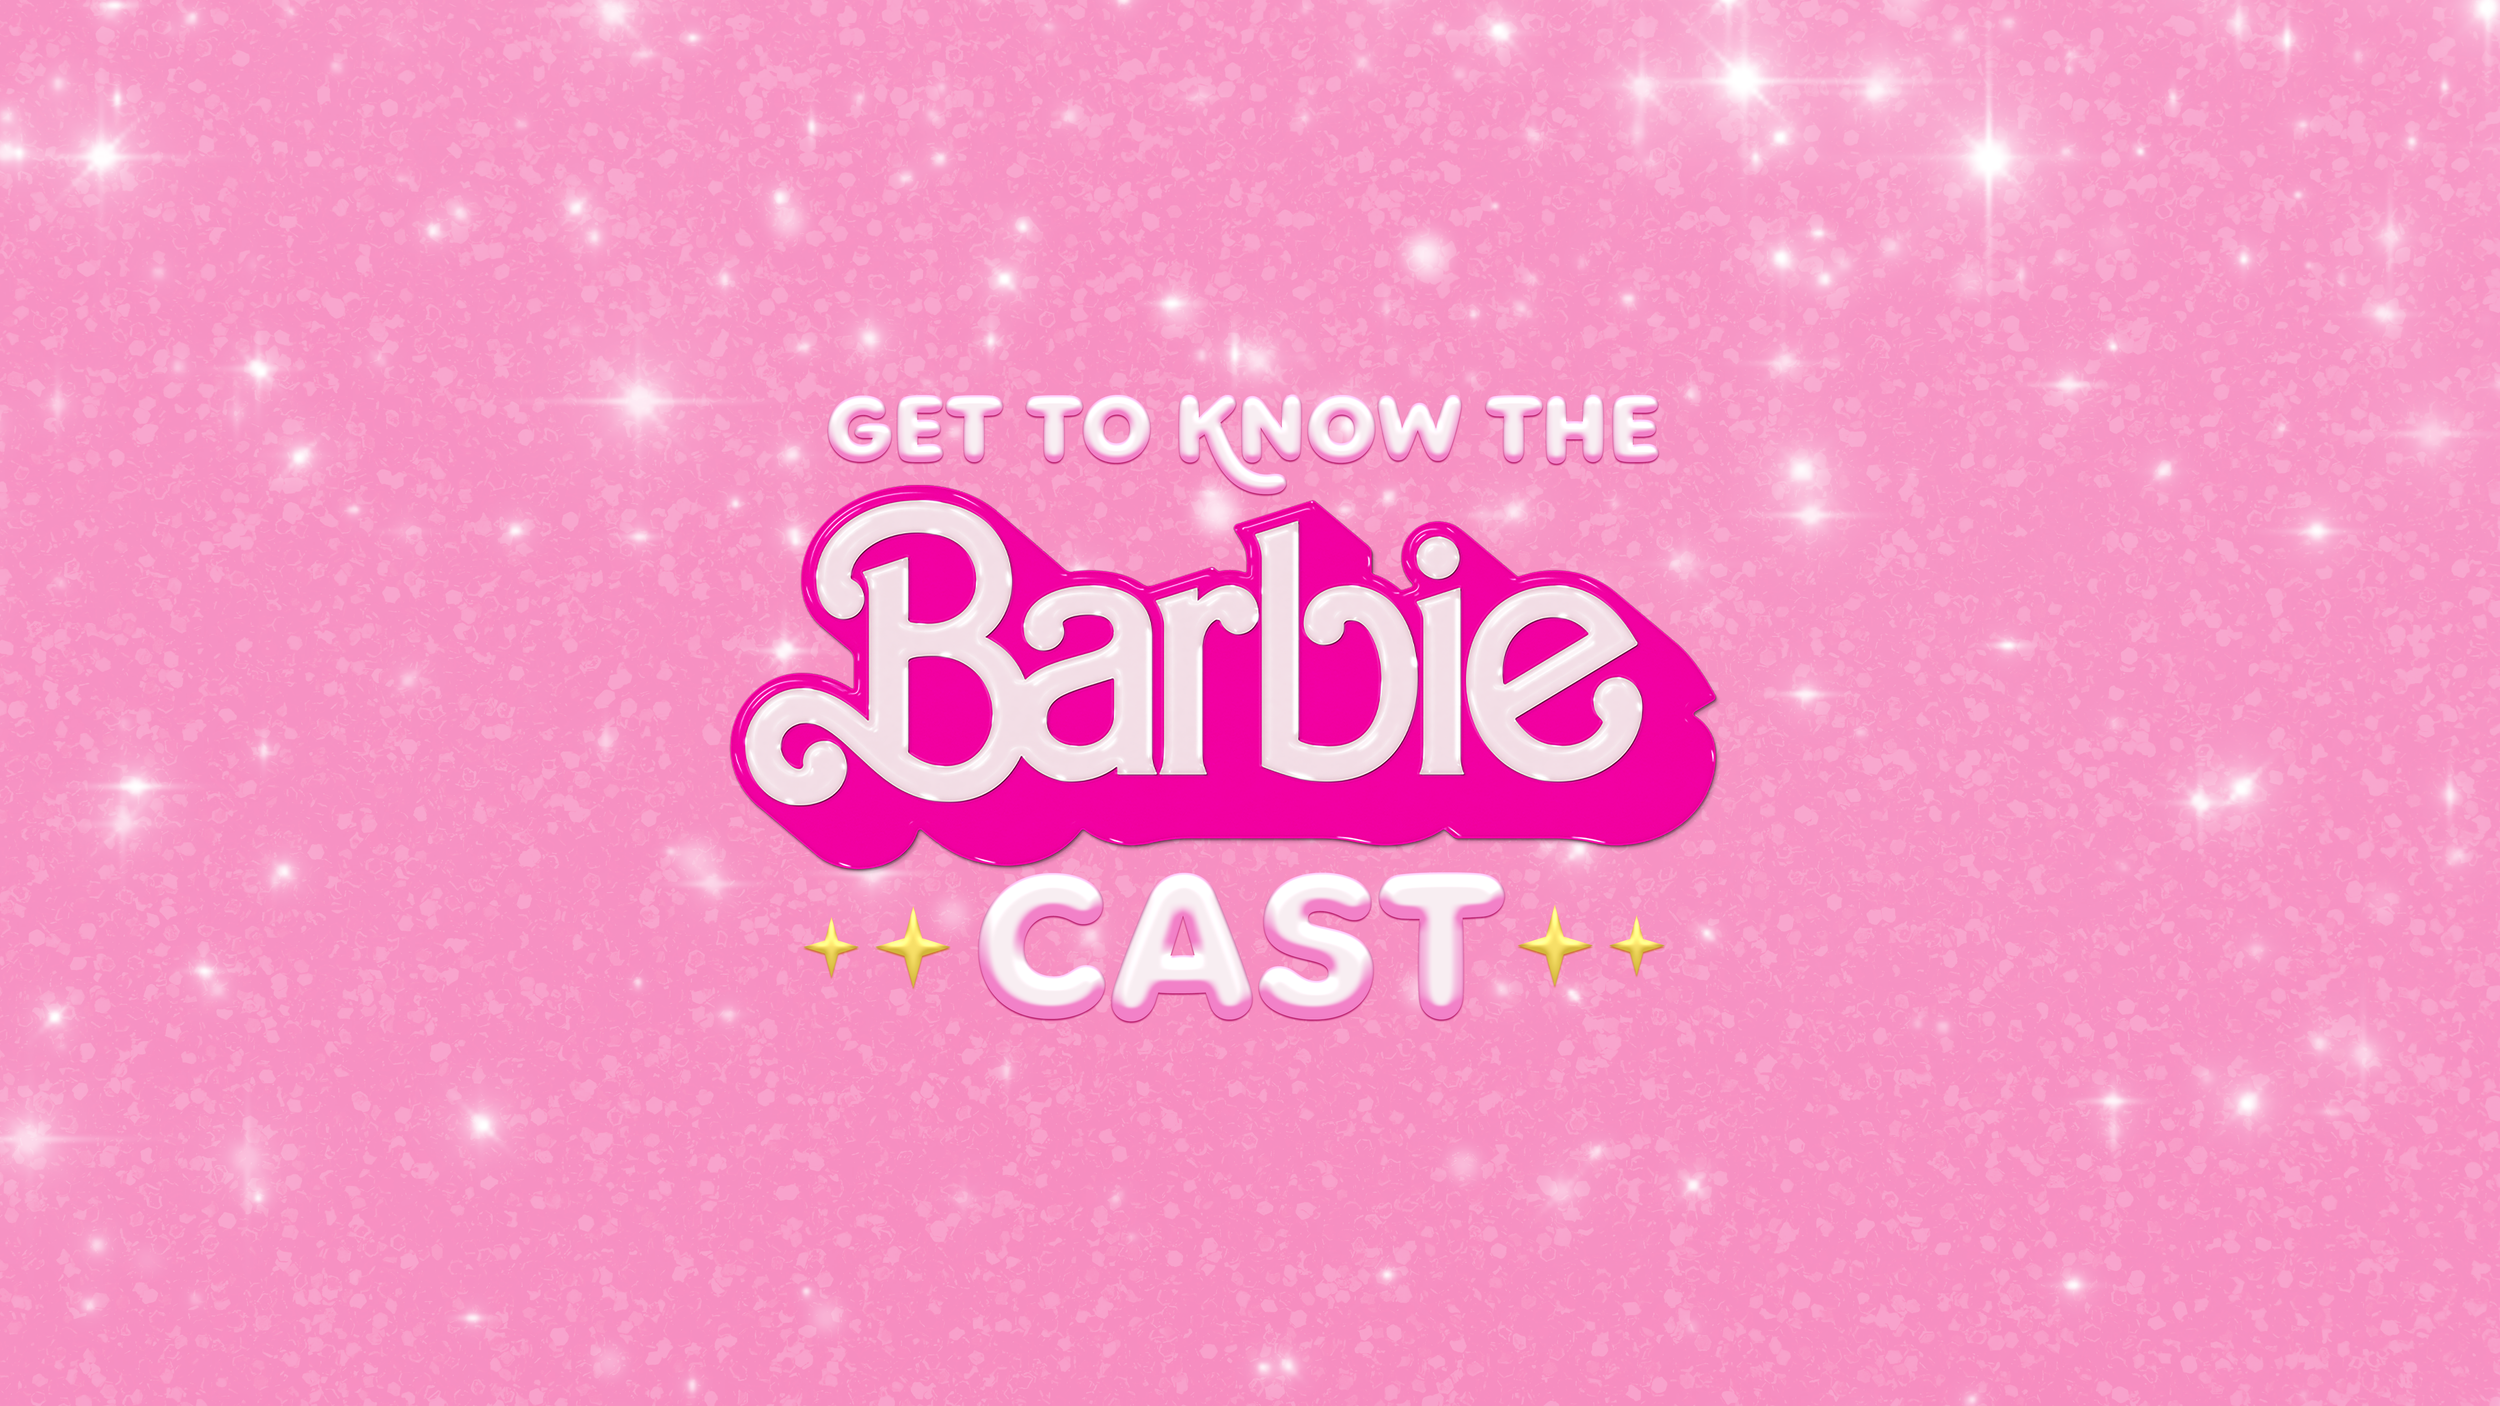 Brand-Barbie-Get to Know-GFX-TITLE CARD-OPTION 3-v6.4.png